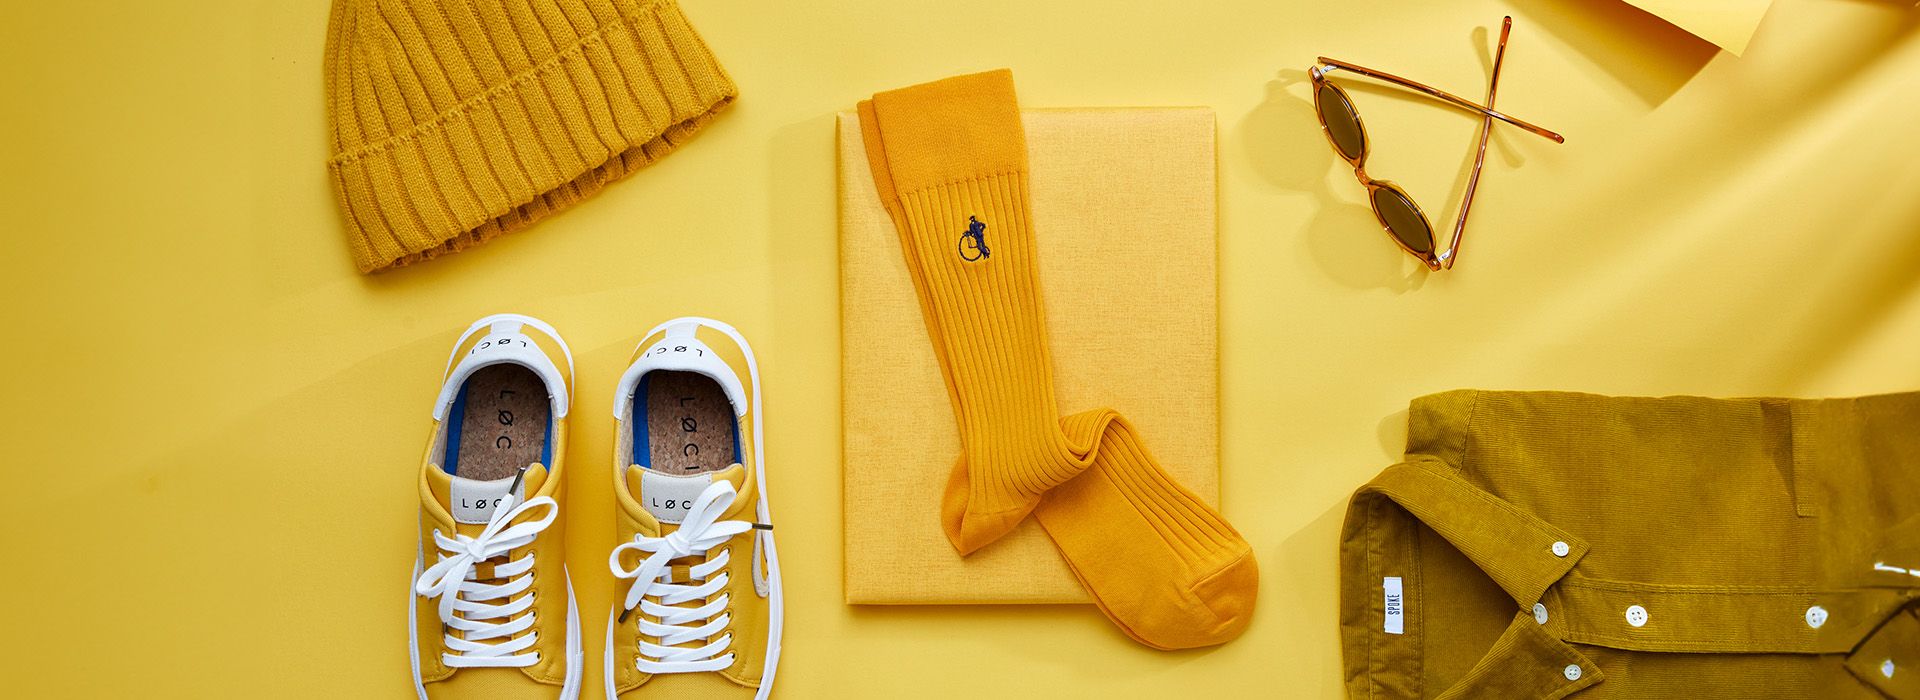 Men’s Style Tips: How to wear yellow socks